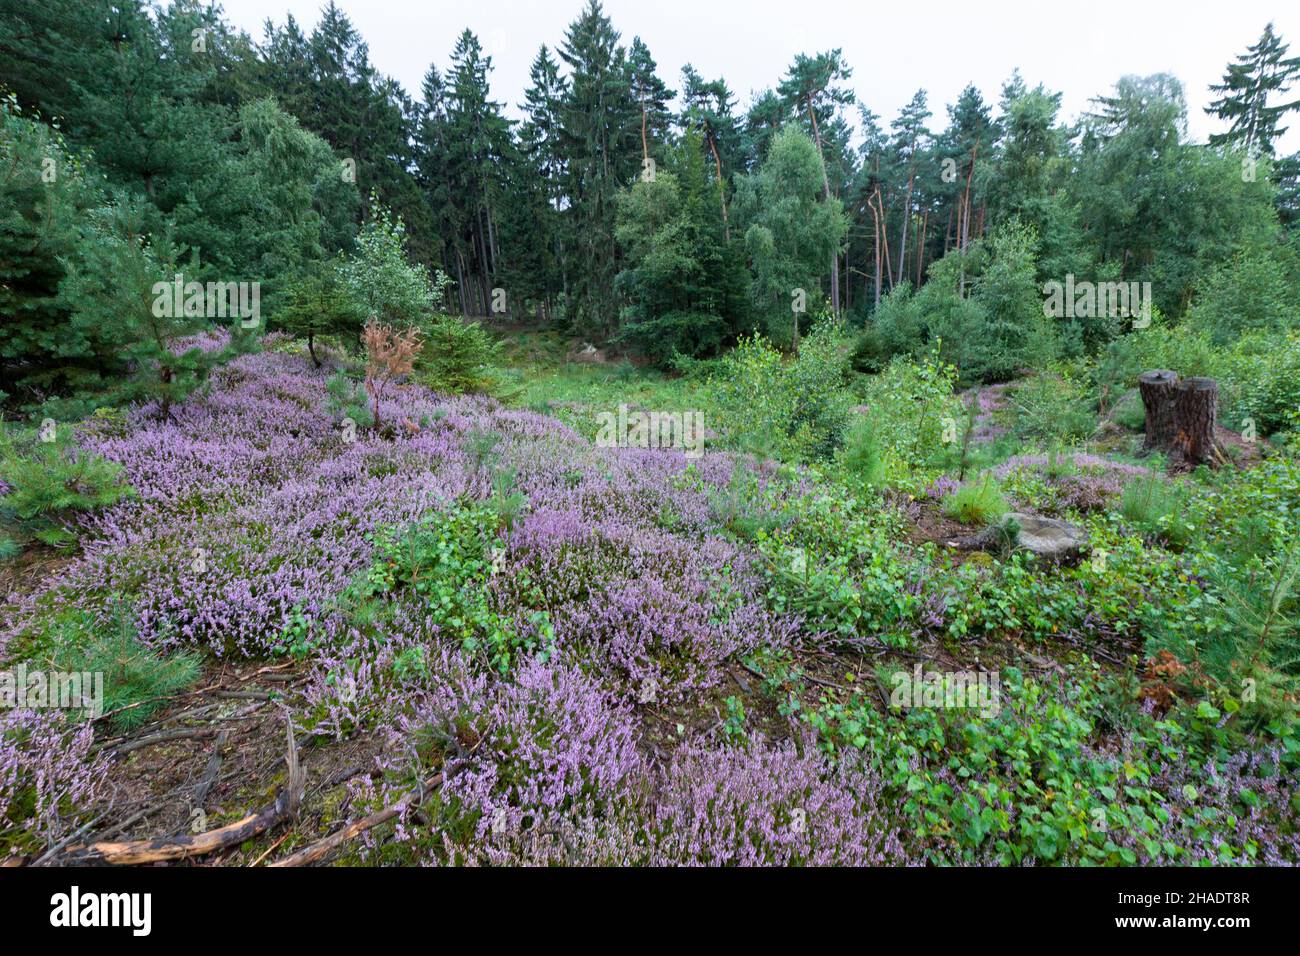 Common Heather, (Calluna vulgaris), in flower in August, growing in opening in forest, Lower Saxony, Germany Stock Photo